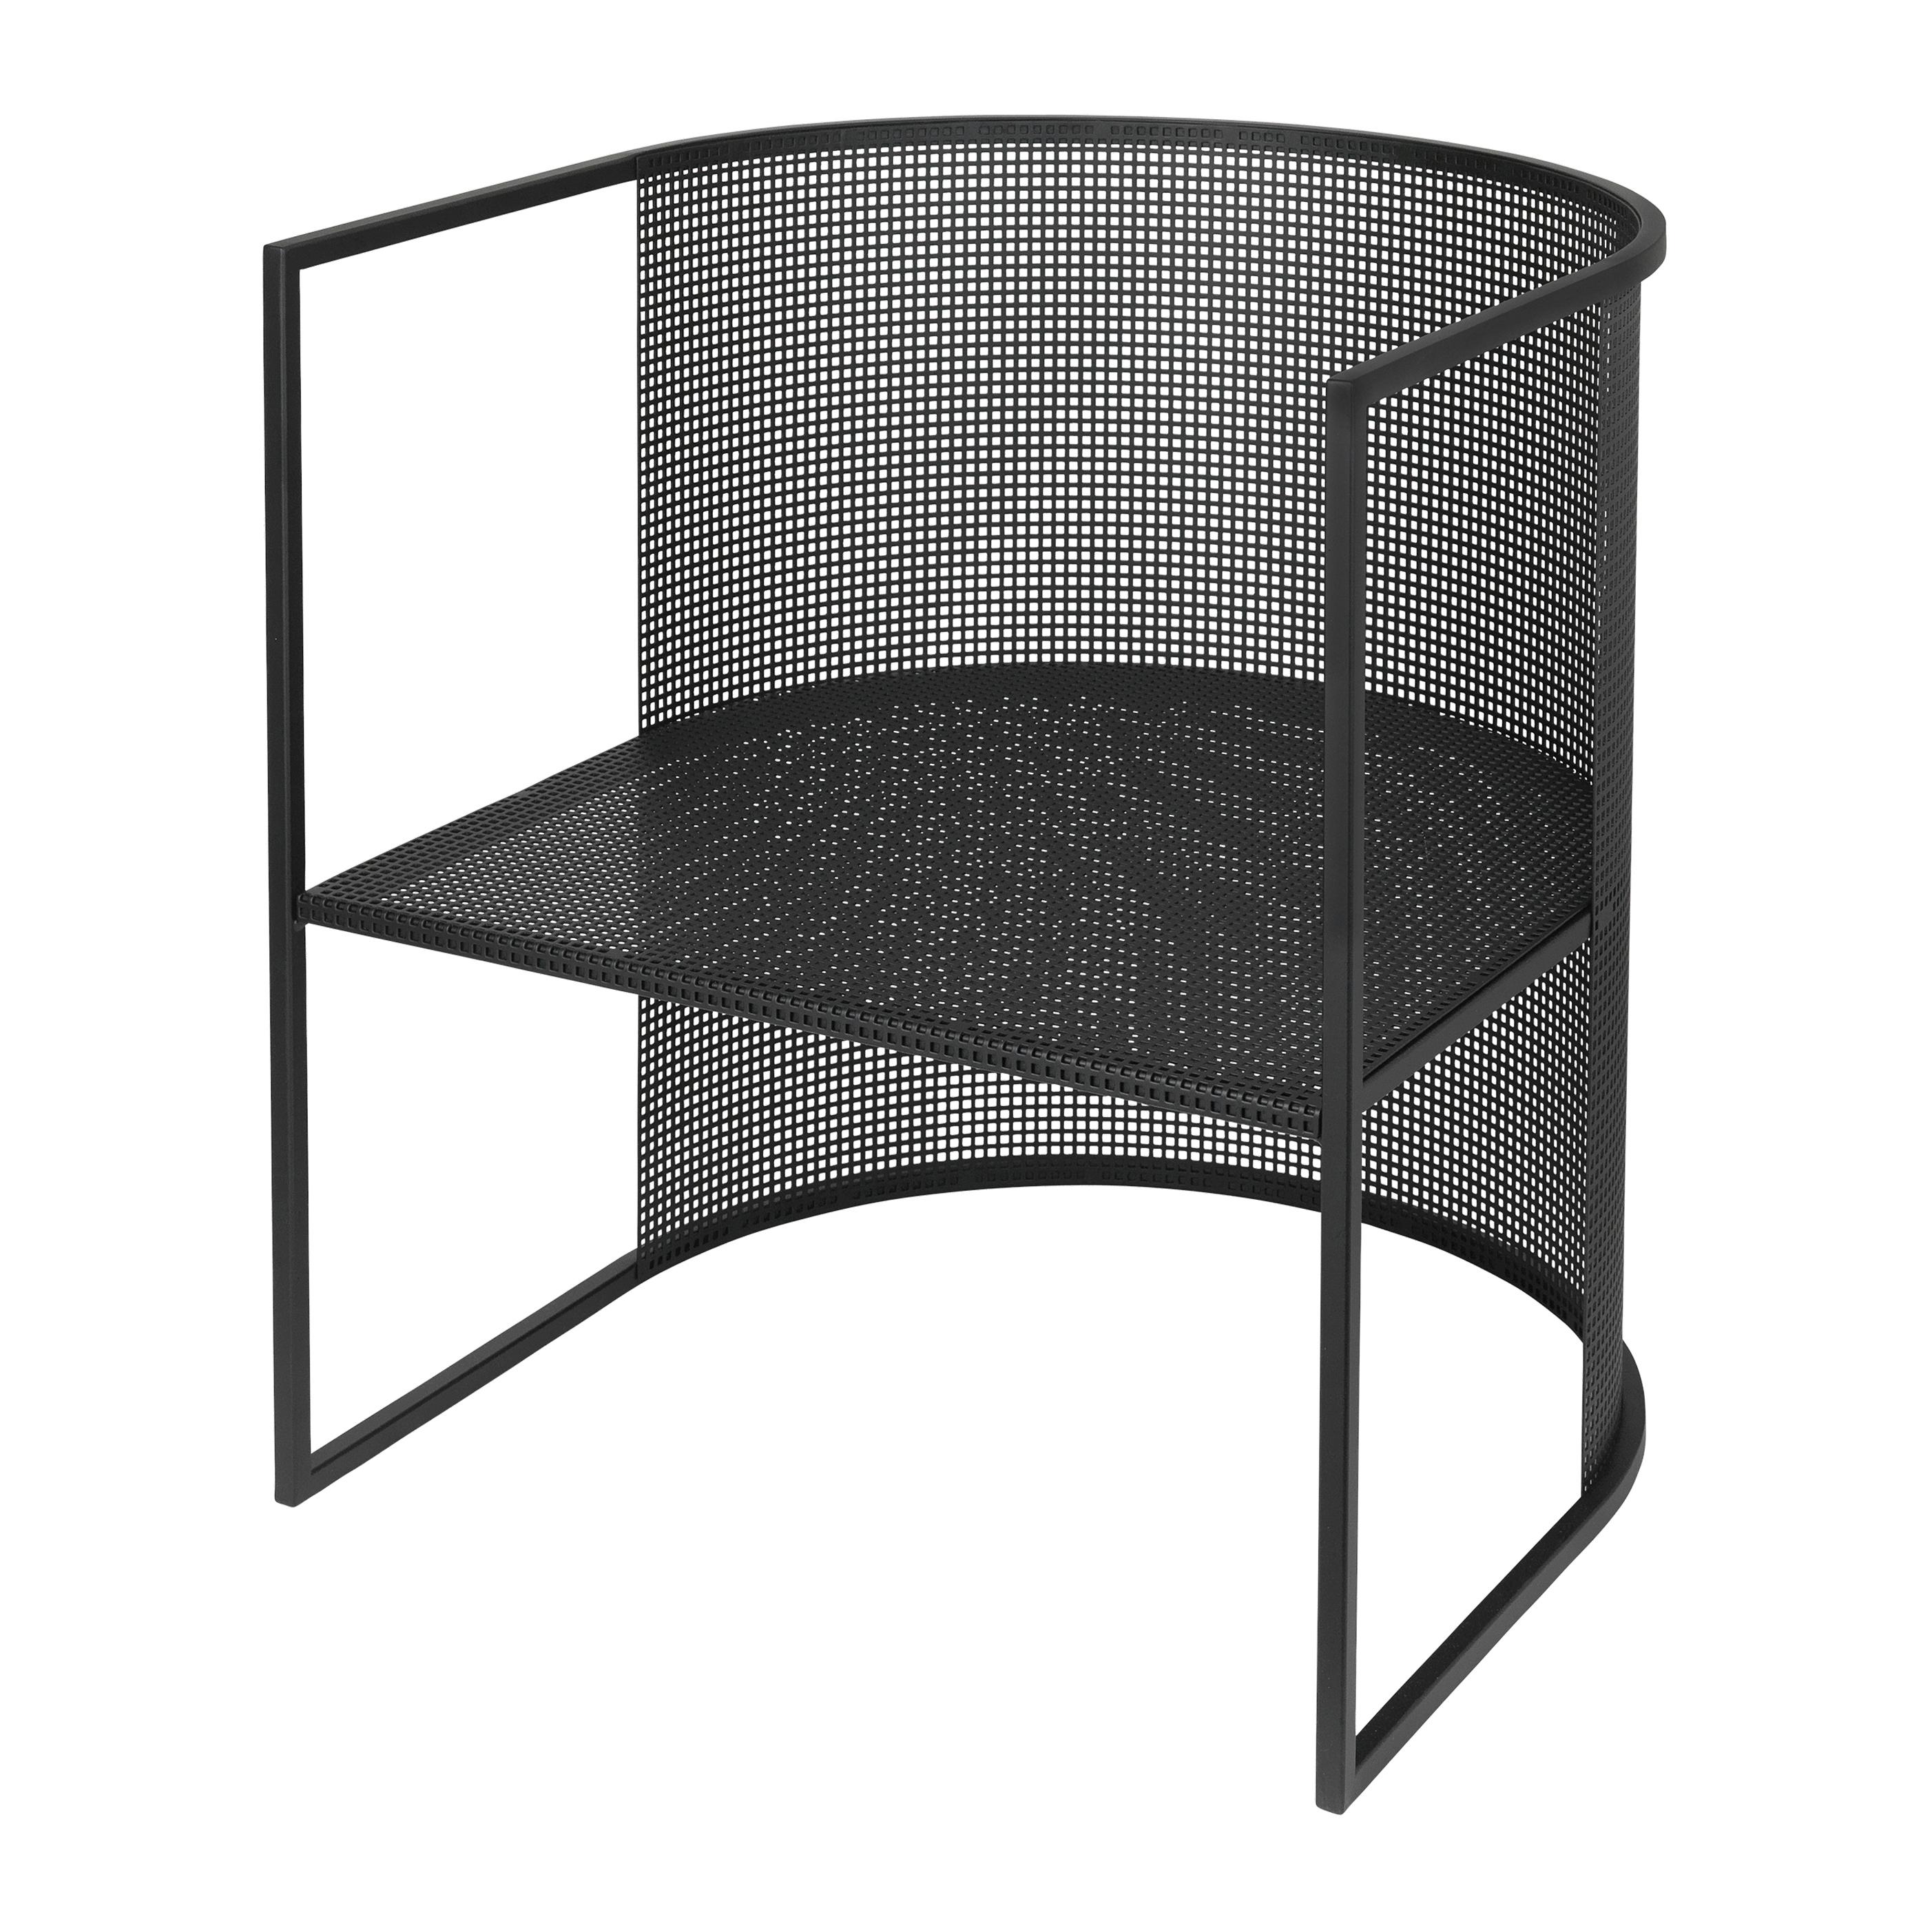 Black steel Bahaus lounge chair by Kristina Dam Studio
Materials: Black outdoor powder-coated steel
Dimensions: 67 x 63 x 64 cm

*Safe to use outdoor.

Kristina Dam graduated from The Royal Danish School of Fine Arts, Architecture and Design